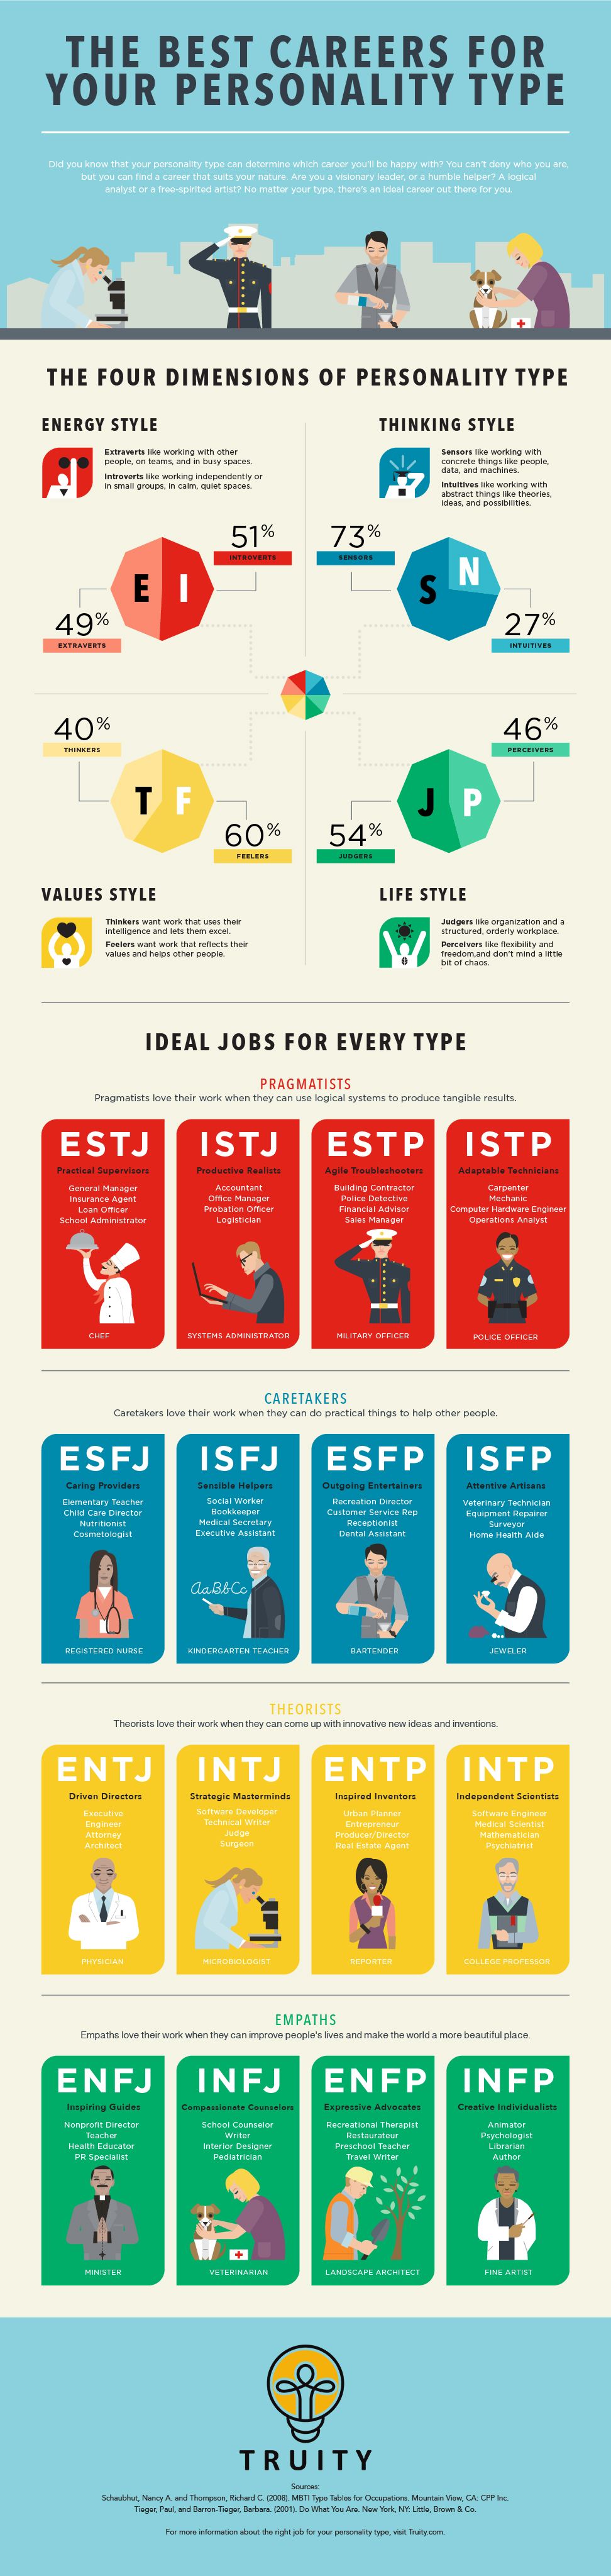 The Best Careers for Your Personality Type (Infographic) | Entrepreneur